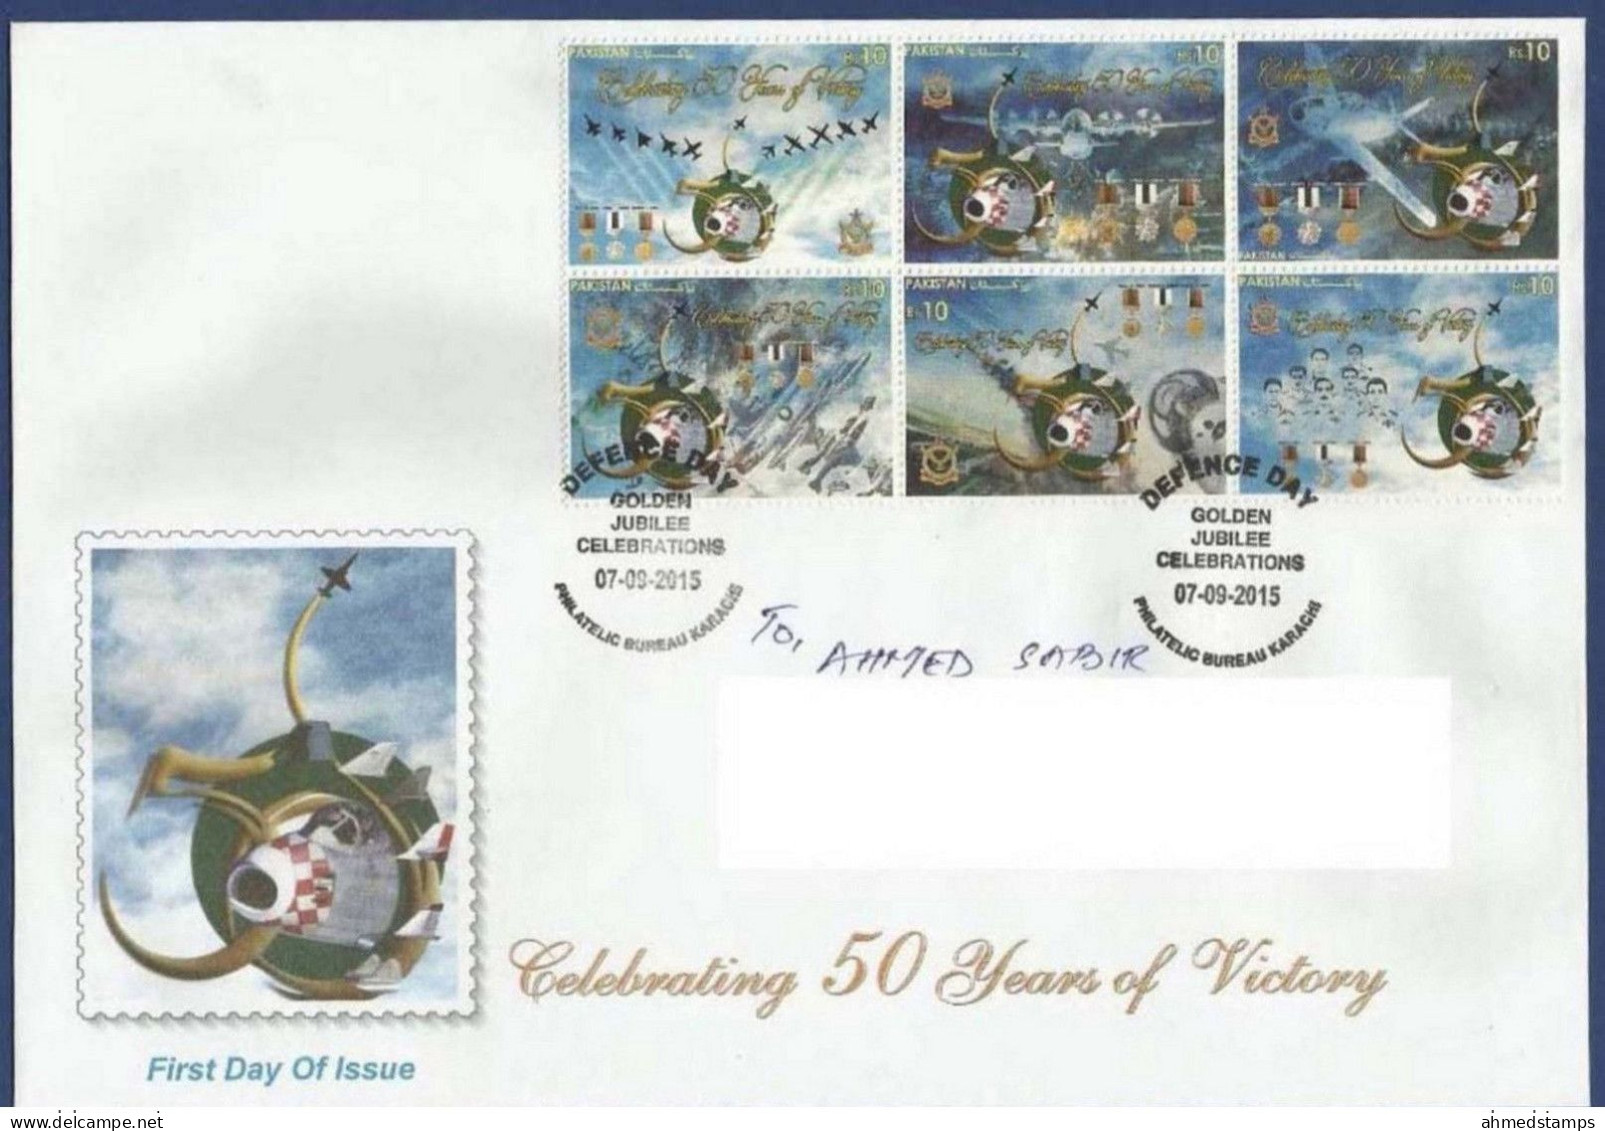 PAKISTAN 2015 POSTAL USED AIRMAIL FDC FIRST DAY COVER  50 YEARS VICTORY AIRFORCE ARMY JET PLANE HERO MEDAL FIGHTER - Pakistan